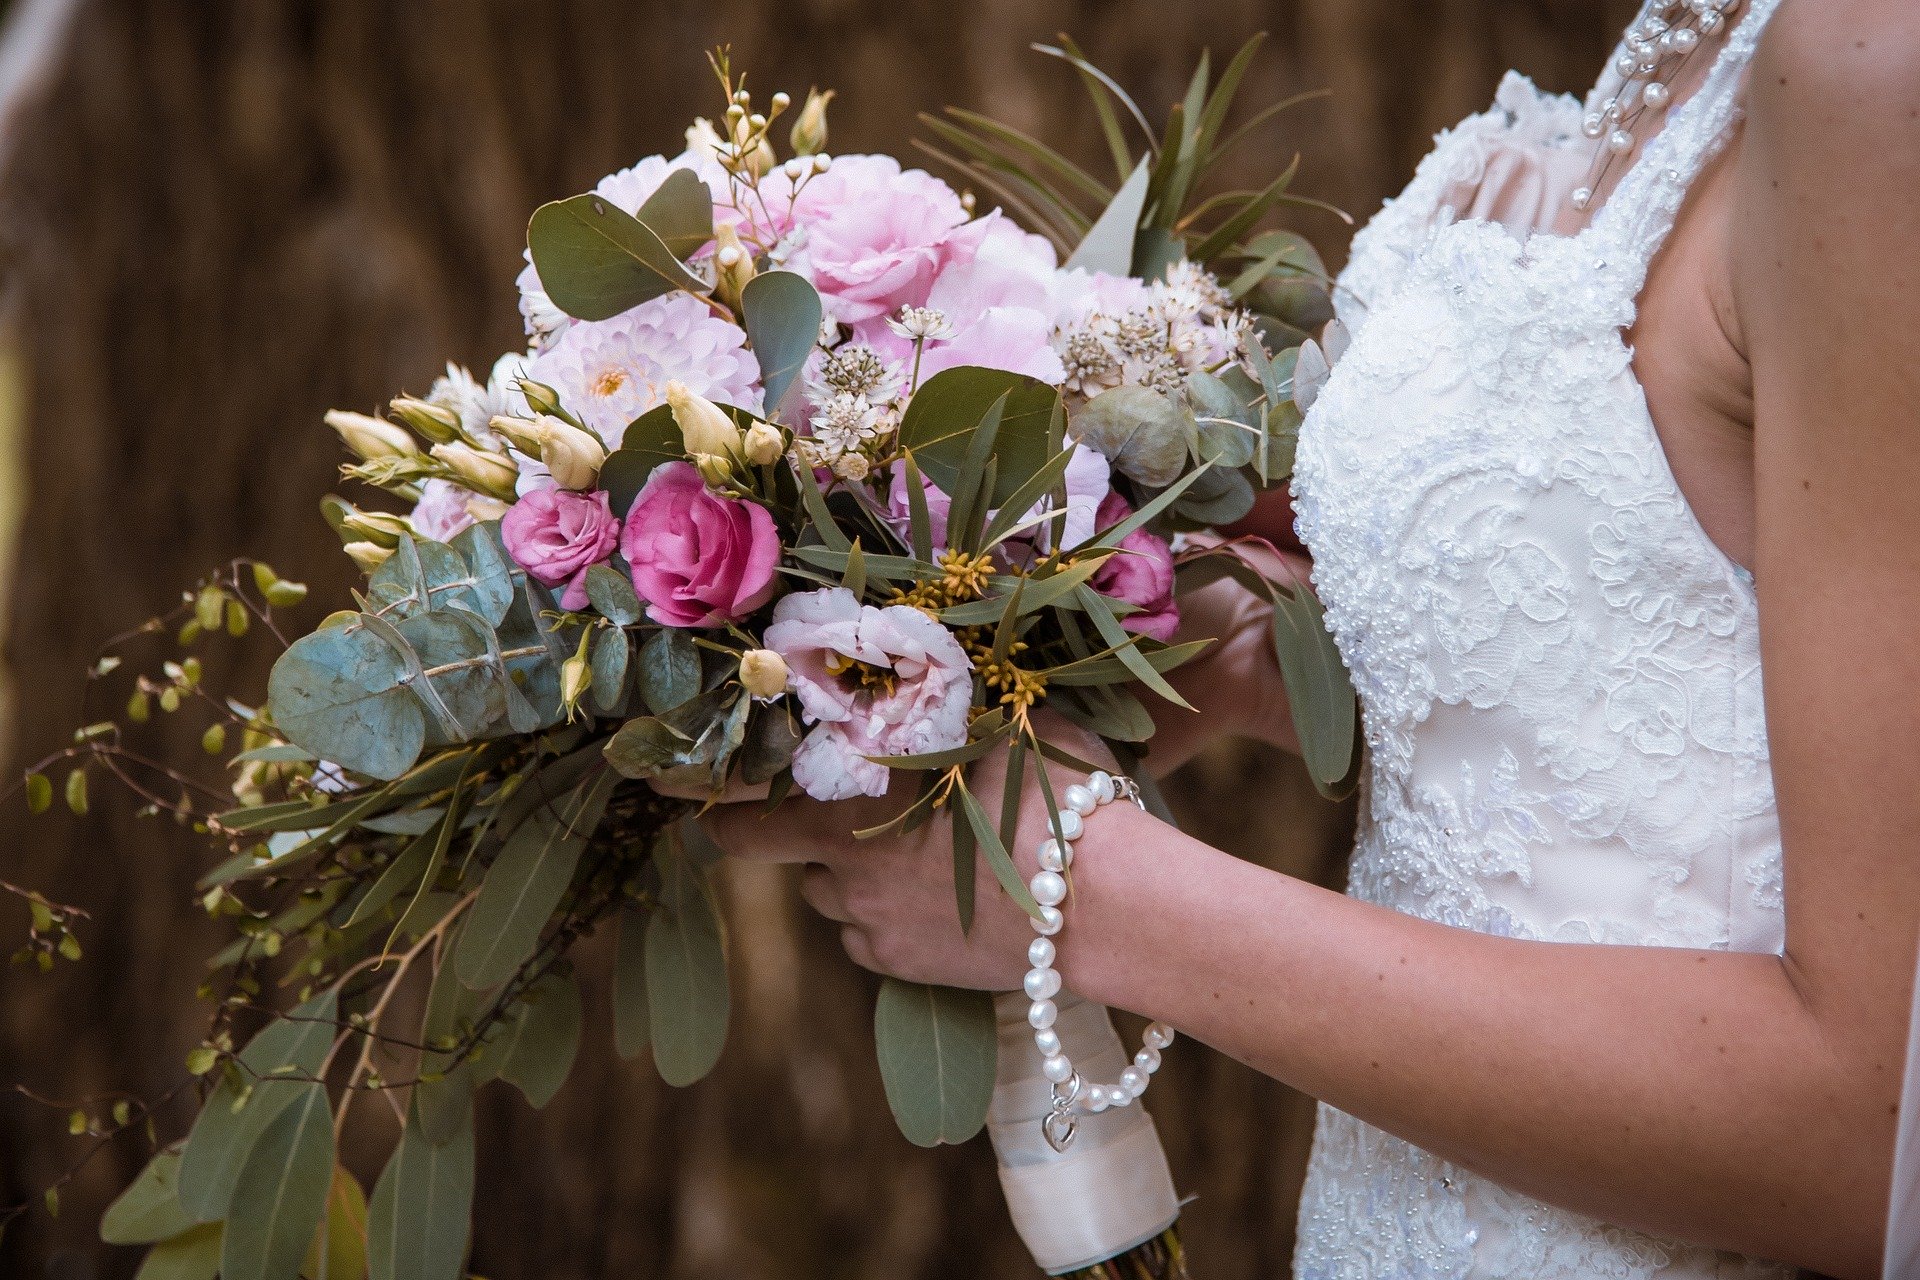 Do Suppliers Charge More for Weddings? - bridal bouquet